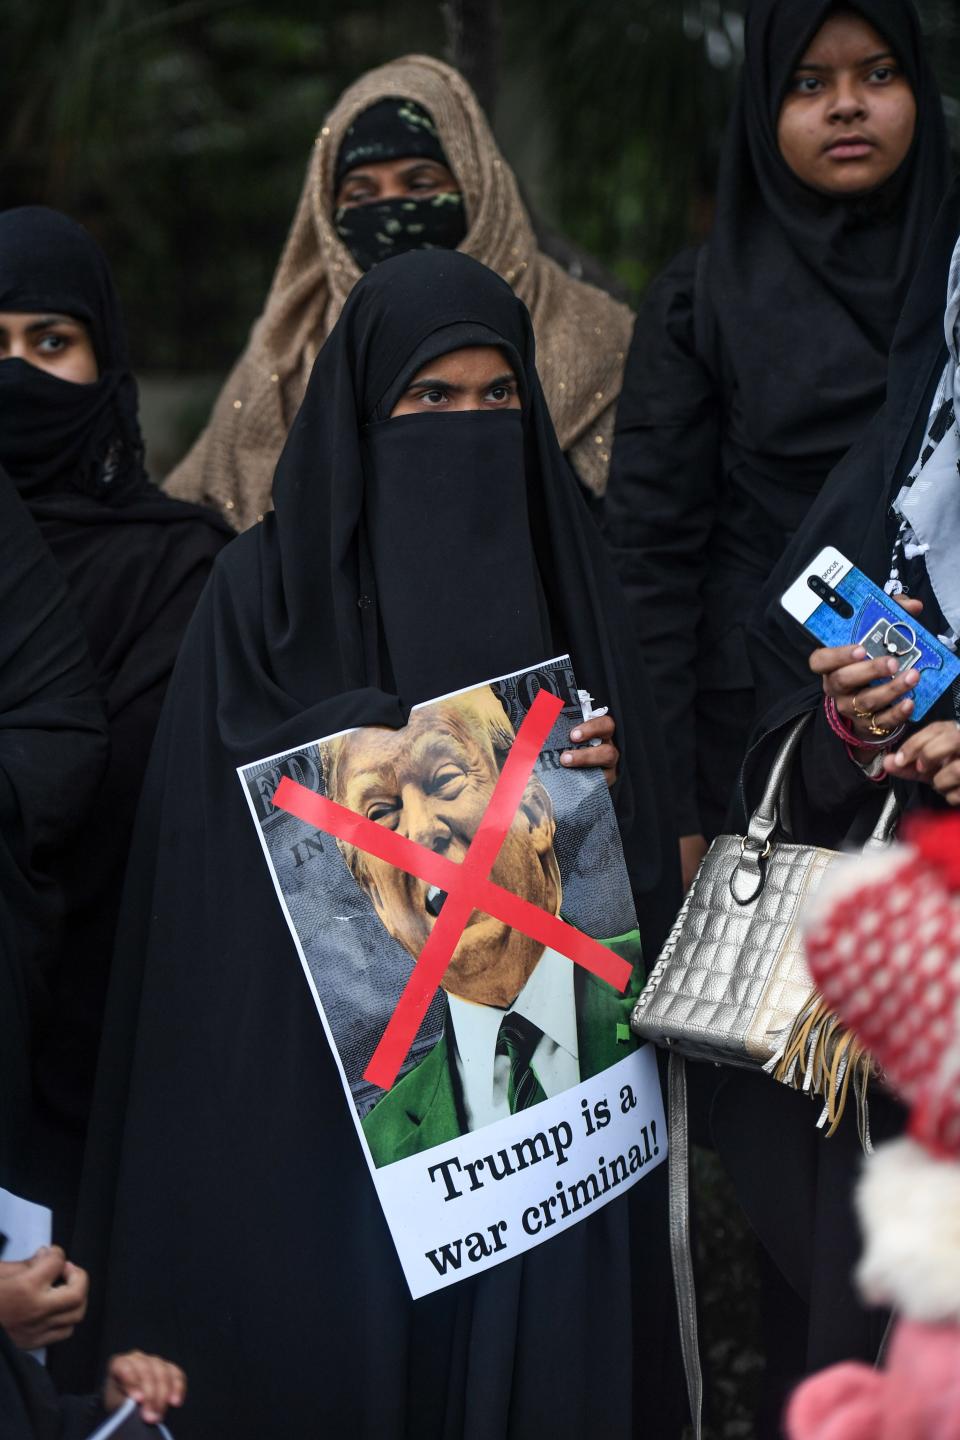 A woman holds a placard to protest against the US authorities for the killing of Iranian commander Qasem Soleimani in Iraq, during a demonstration near the US embassy in New Delhi on January 7, 2020. - A US drone strike killed top Iranian commander Qasem Soleimani at Baghdad's international airport on January 3, dramatically heightening regional tensions and prompting arch enemy Tehran to vow "revenge". (Photo by Prakash SINGH / AFP) (Photo by PRAKASH SINGH/AFP via Getty Images)